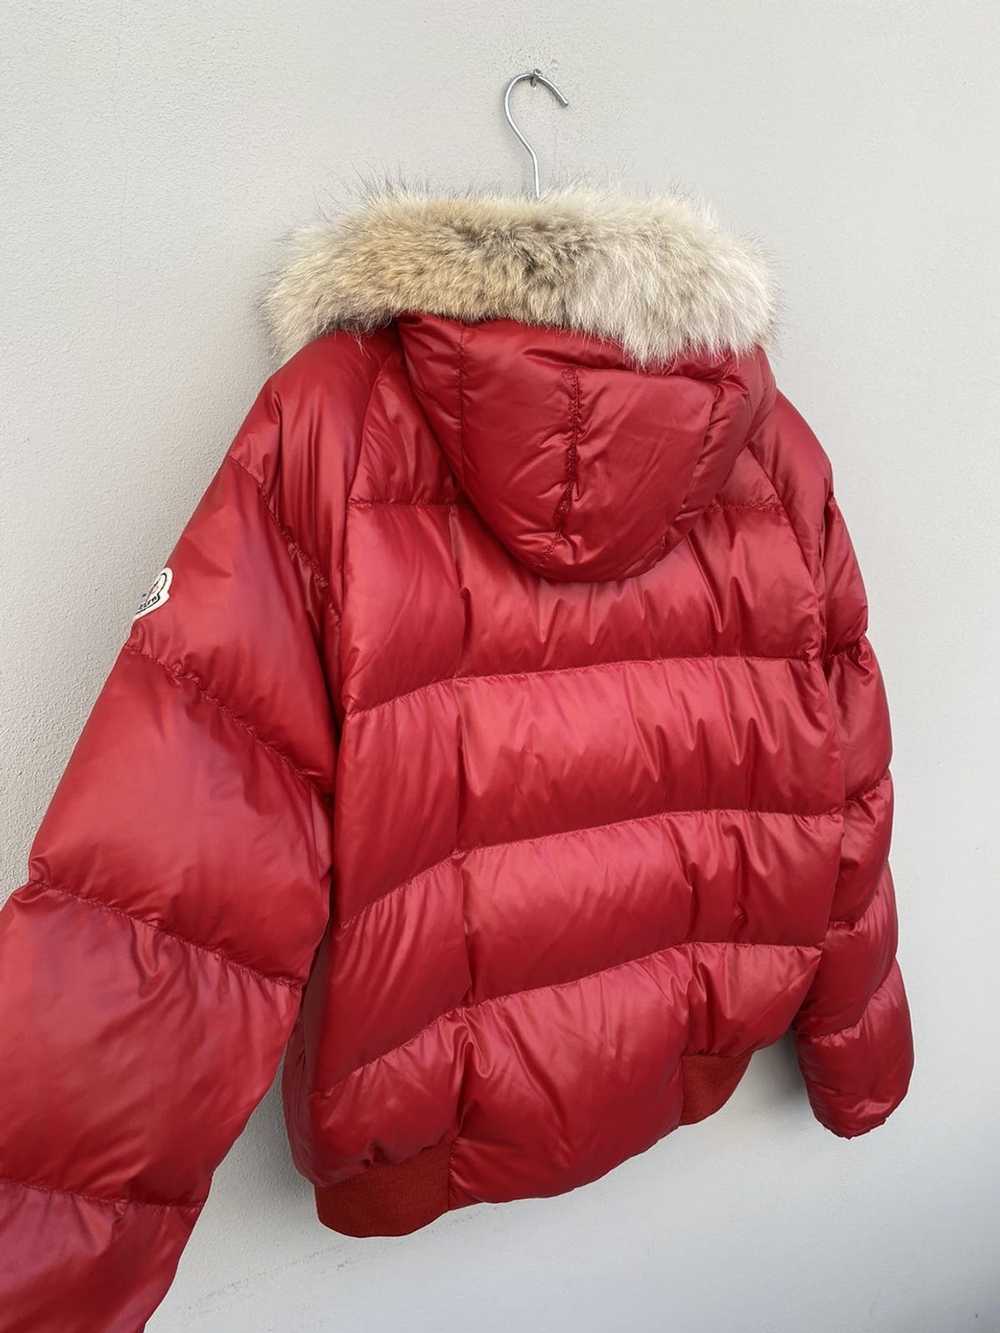 Moncler Moncler Red Down Puffer Jacket - image 6